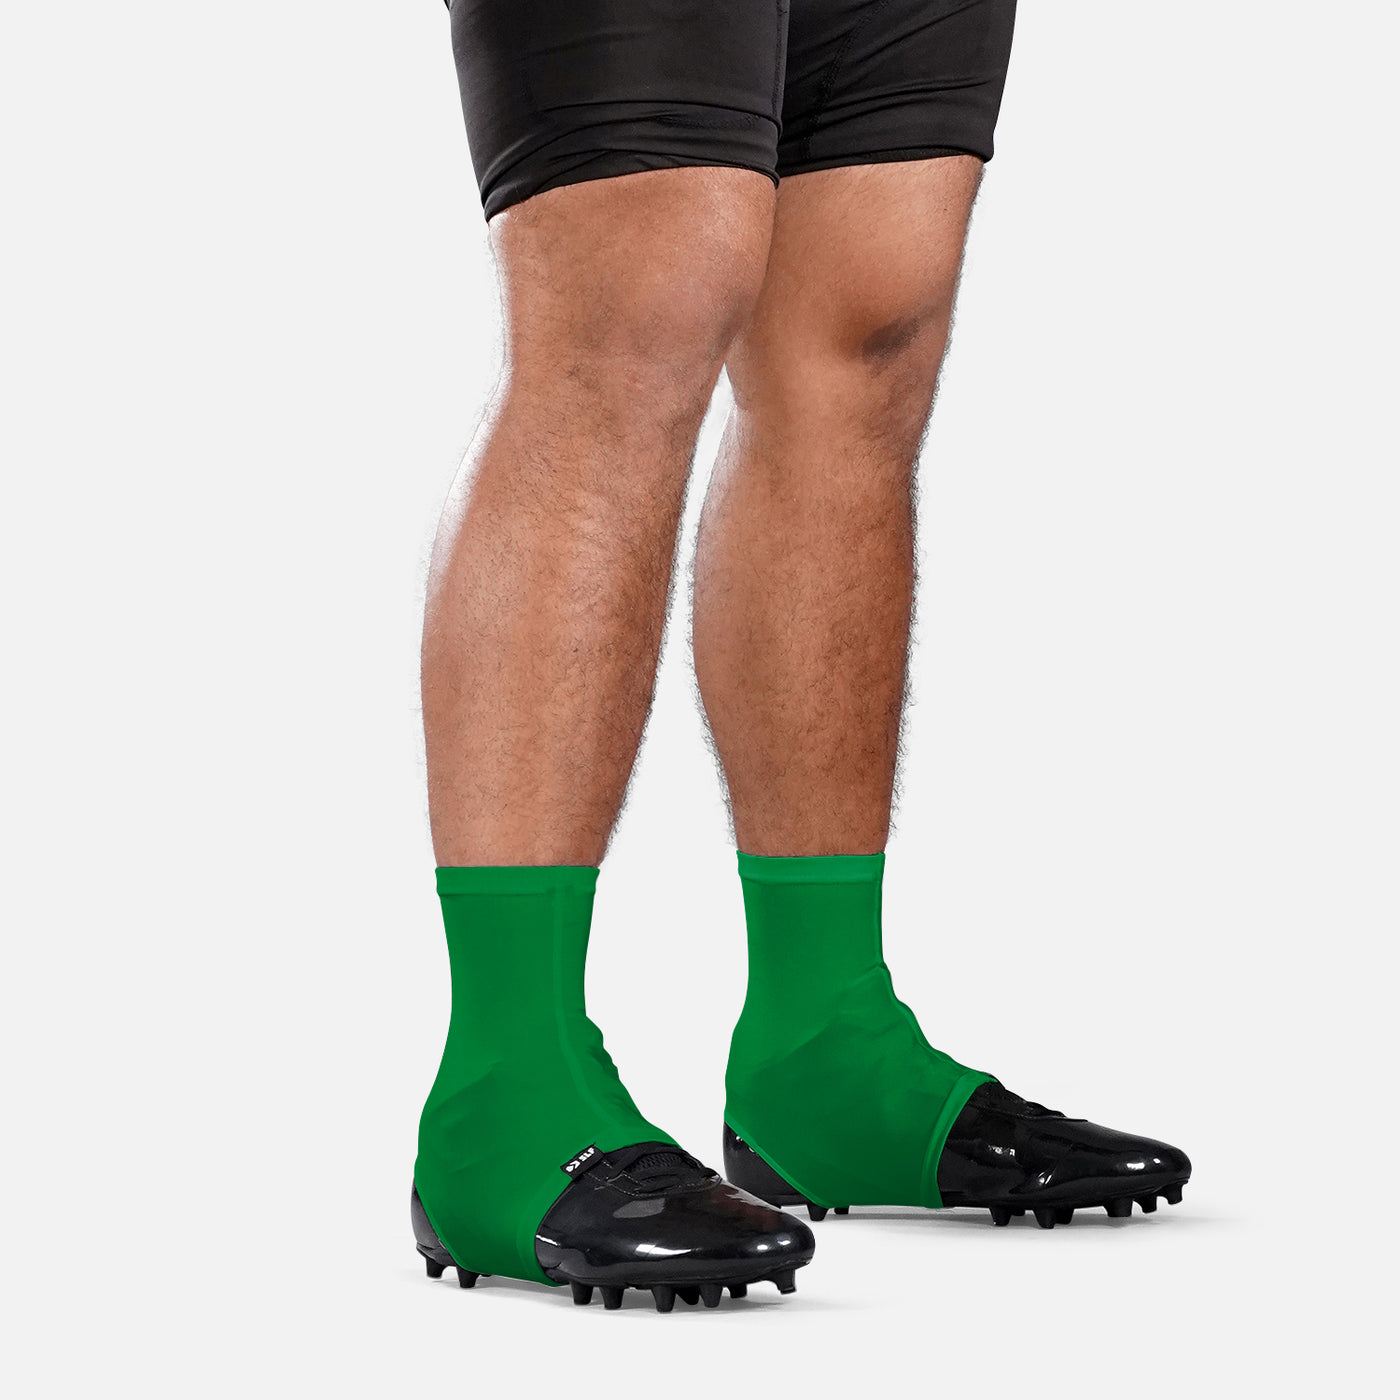 Hue Green Spats / Cleat Covers - Big